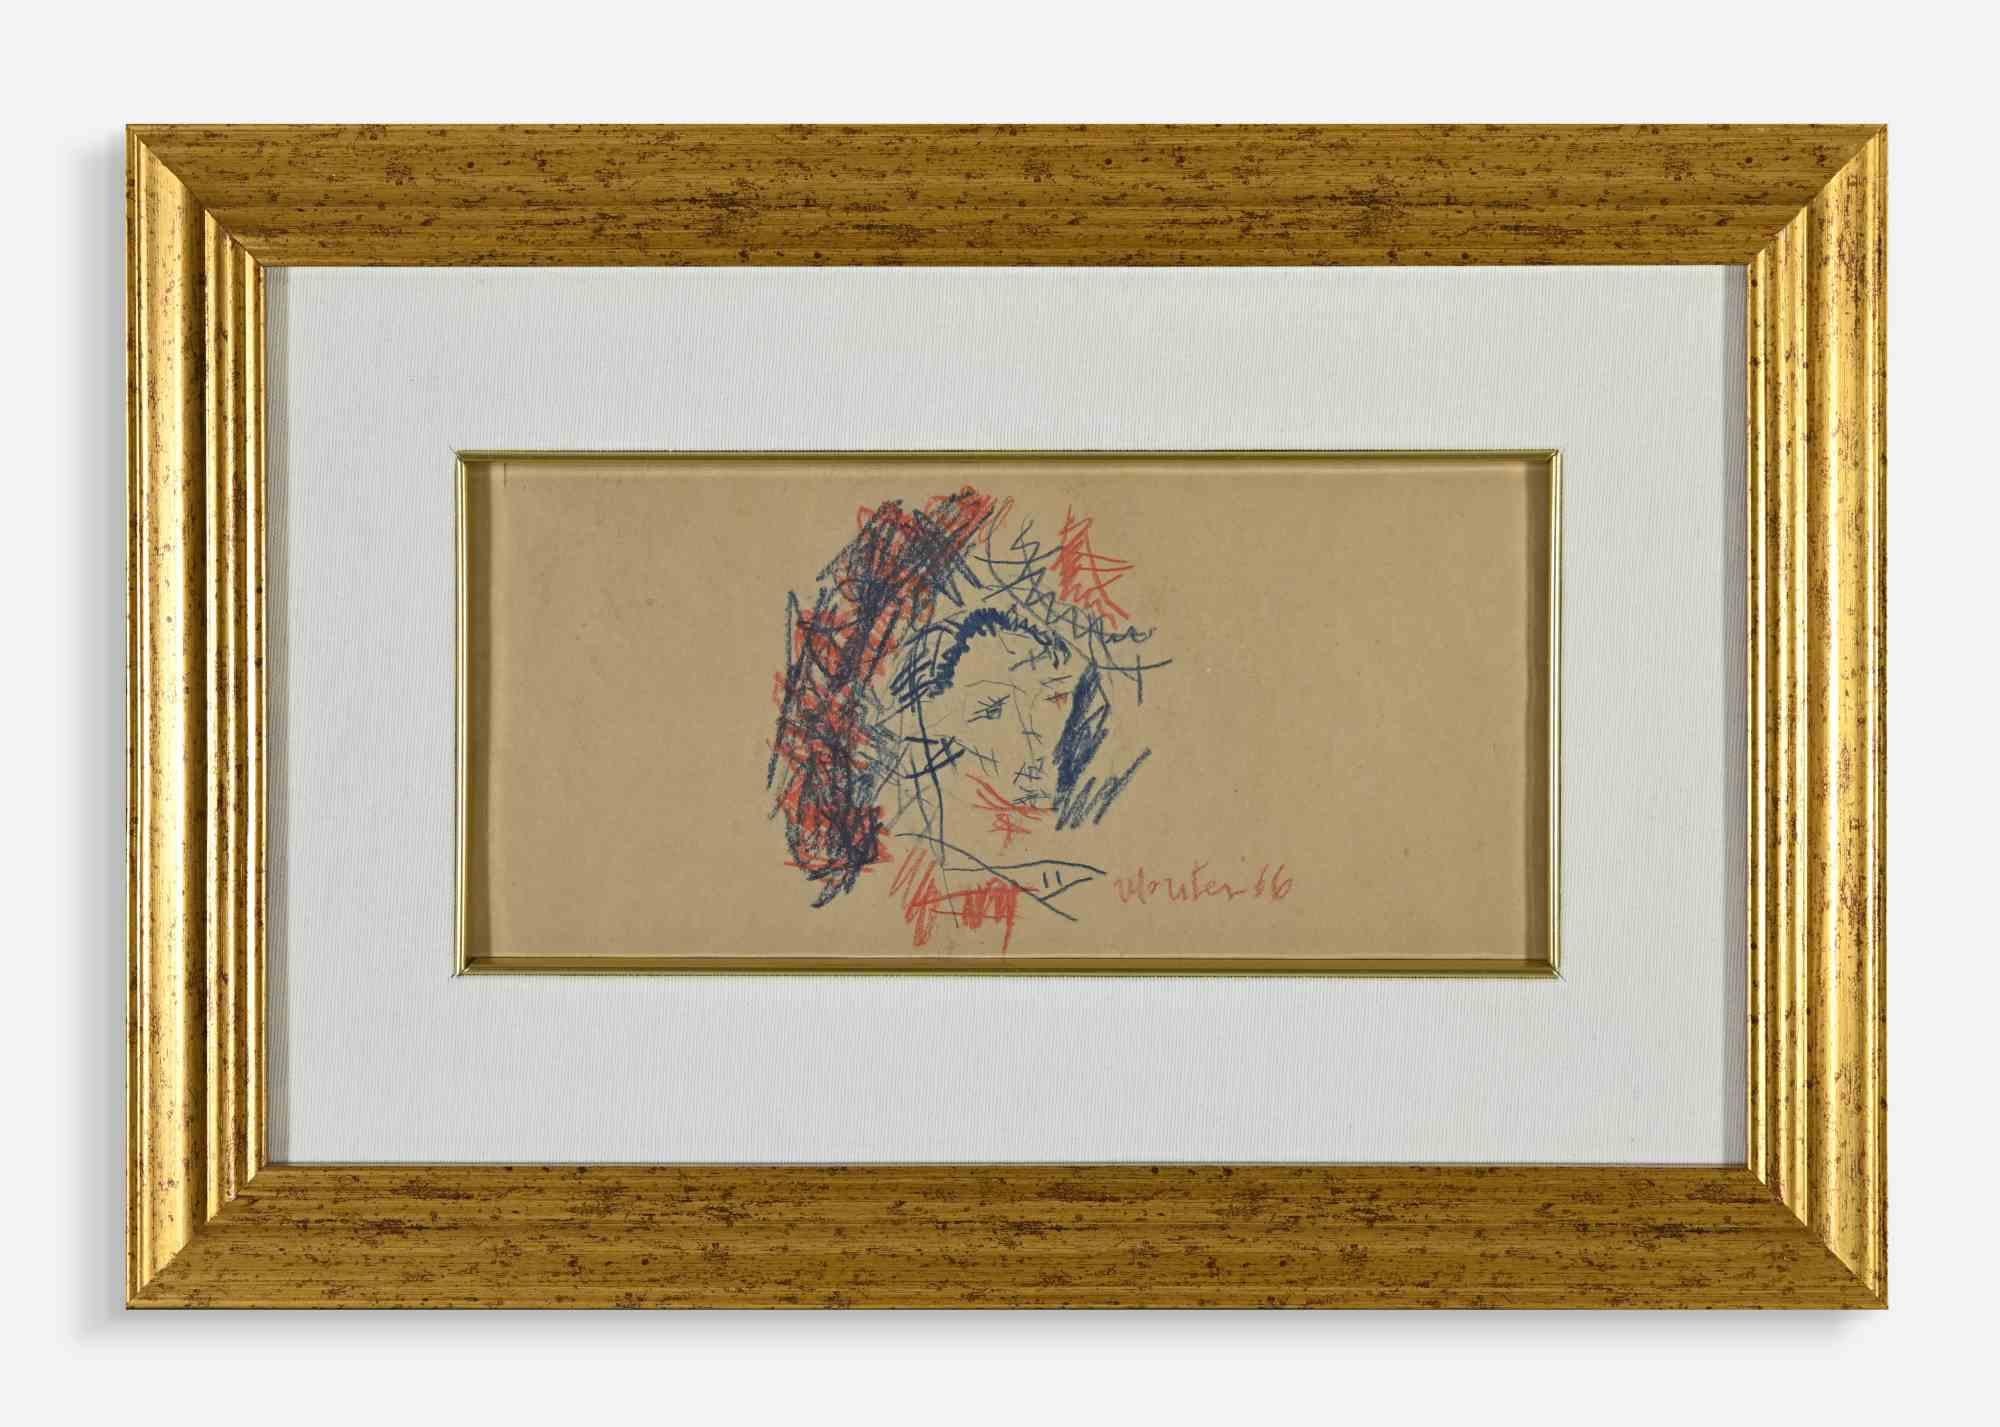 Composition is an artwork realized by Carlo Montesi in 1966. 

33 x 48 cm with frame.

Crayons on cardboard

Handsigned and dated lower right side.

Good conditions!